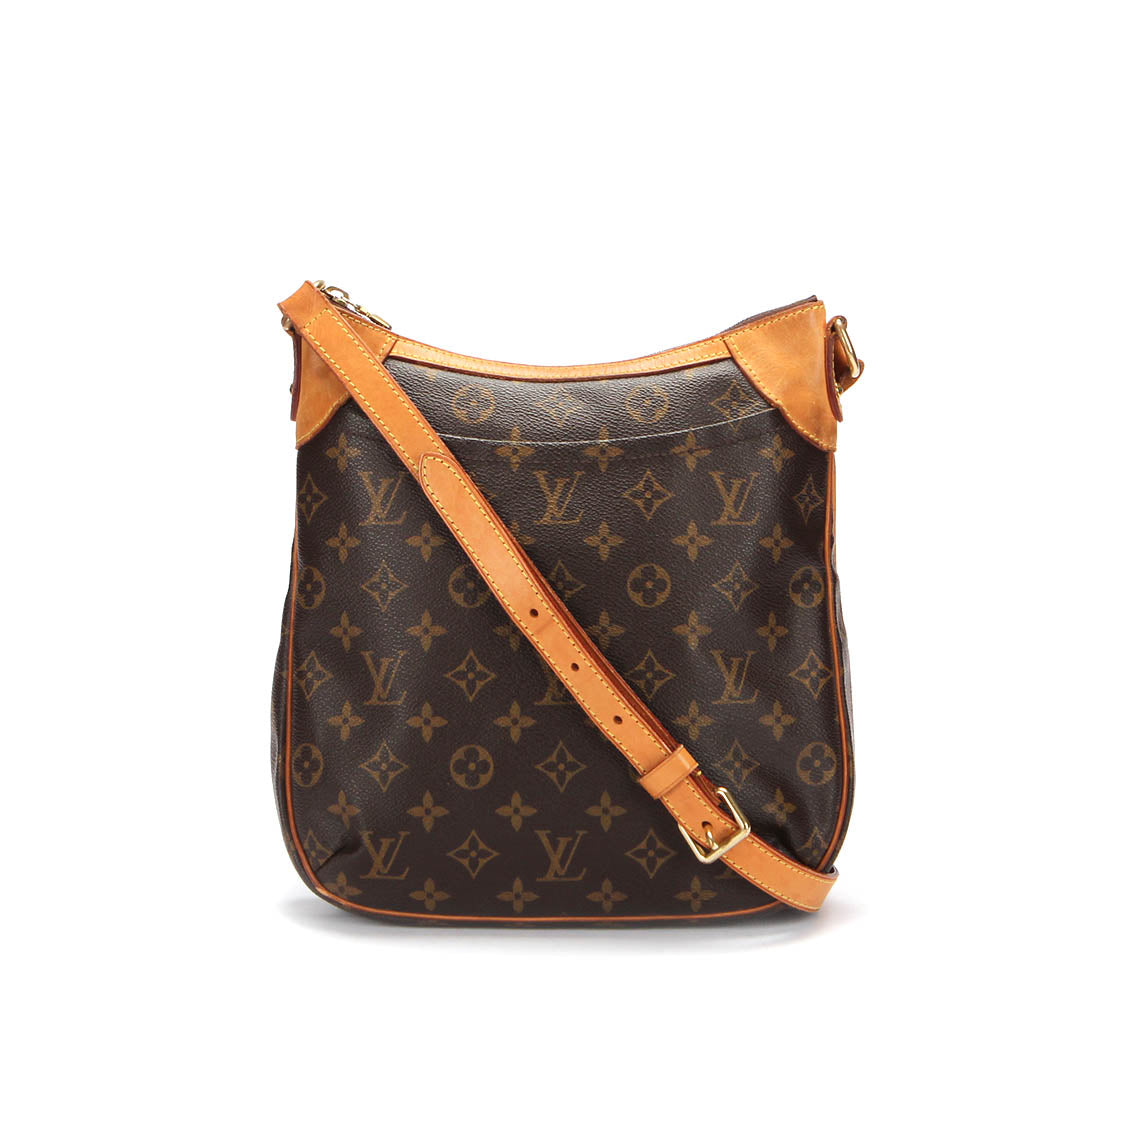 Louis Vuitton オデオンPM M56390 in Good condition